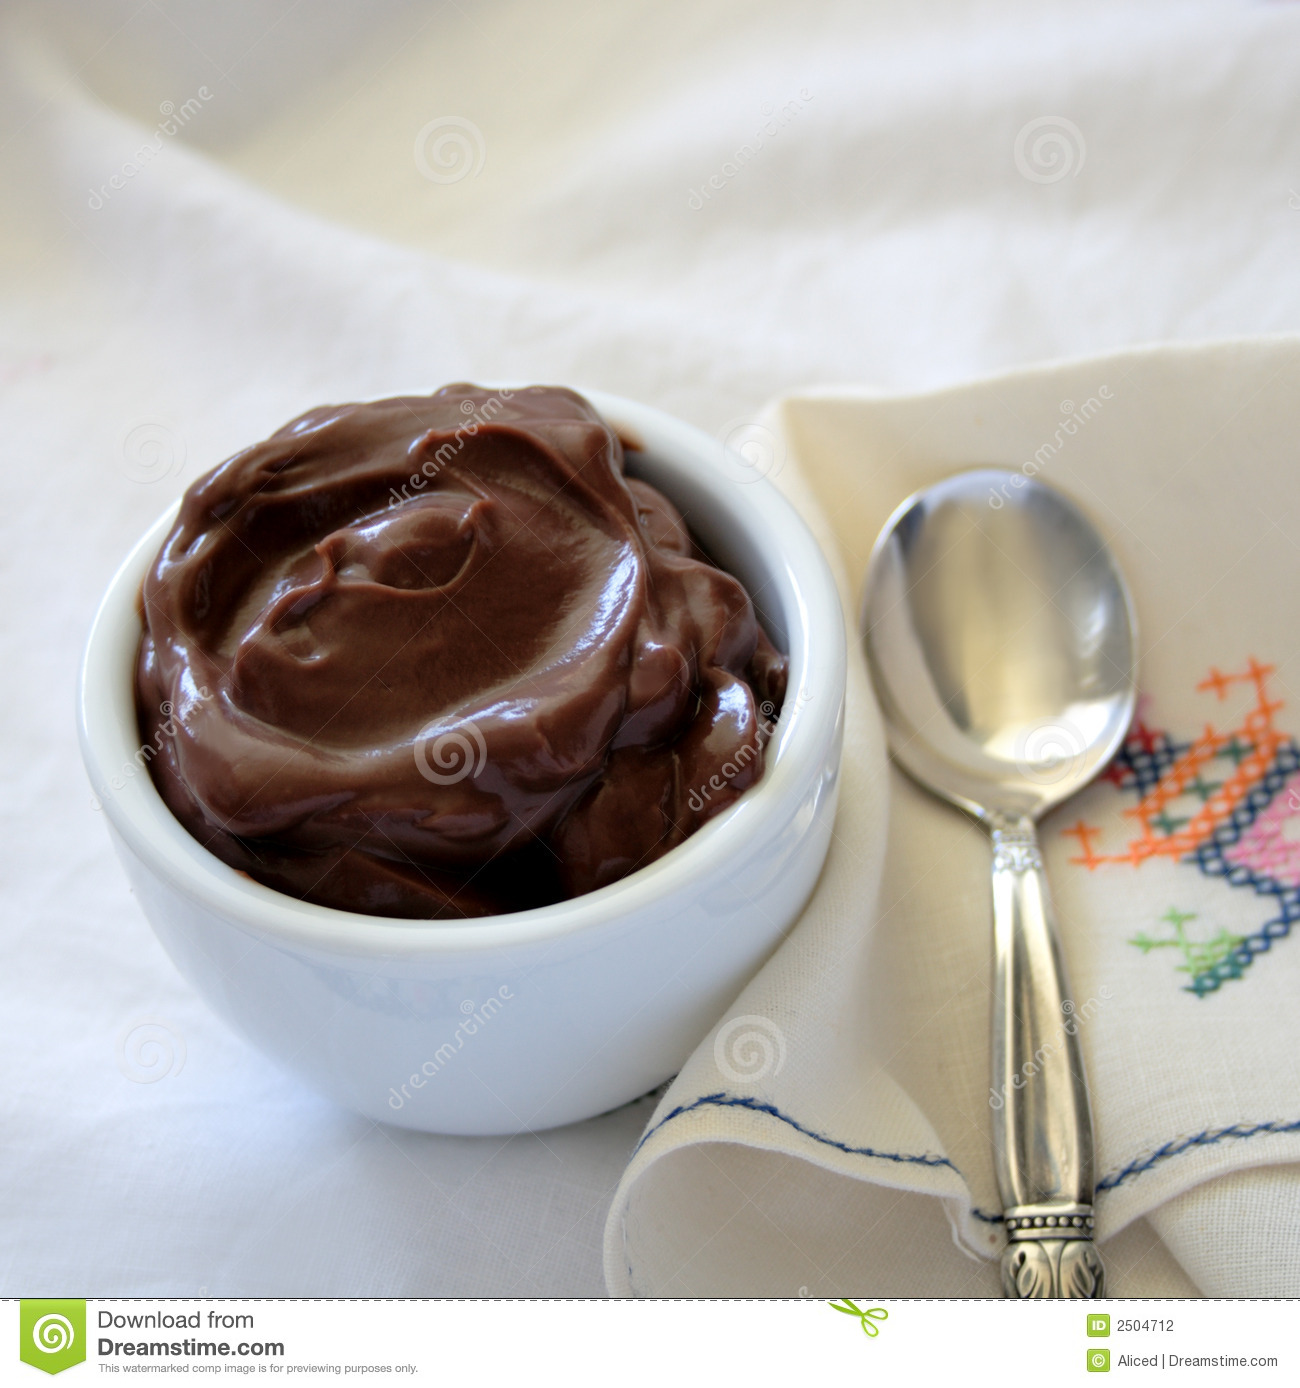 Small Bowl Of Chocolate Pudding With A Silver Spoon On A Vintage